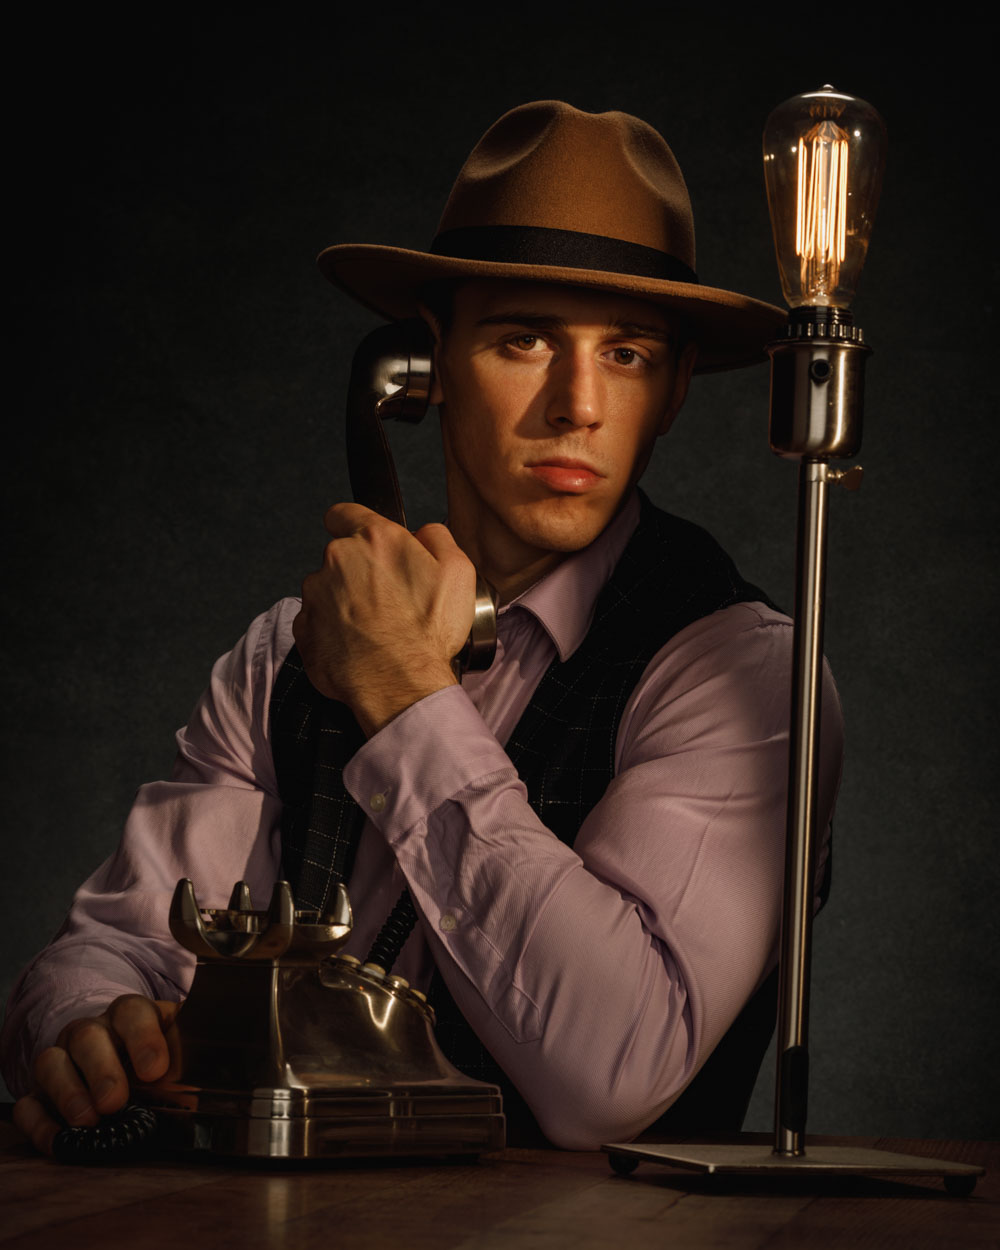 Jonathan as a detective in a film noir scene